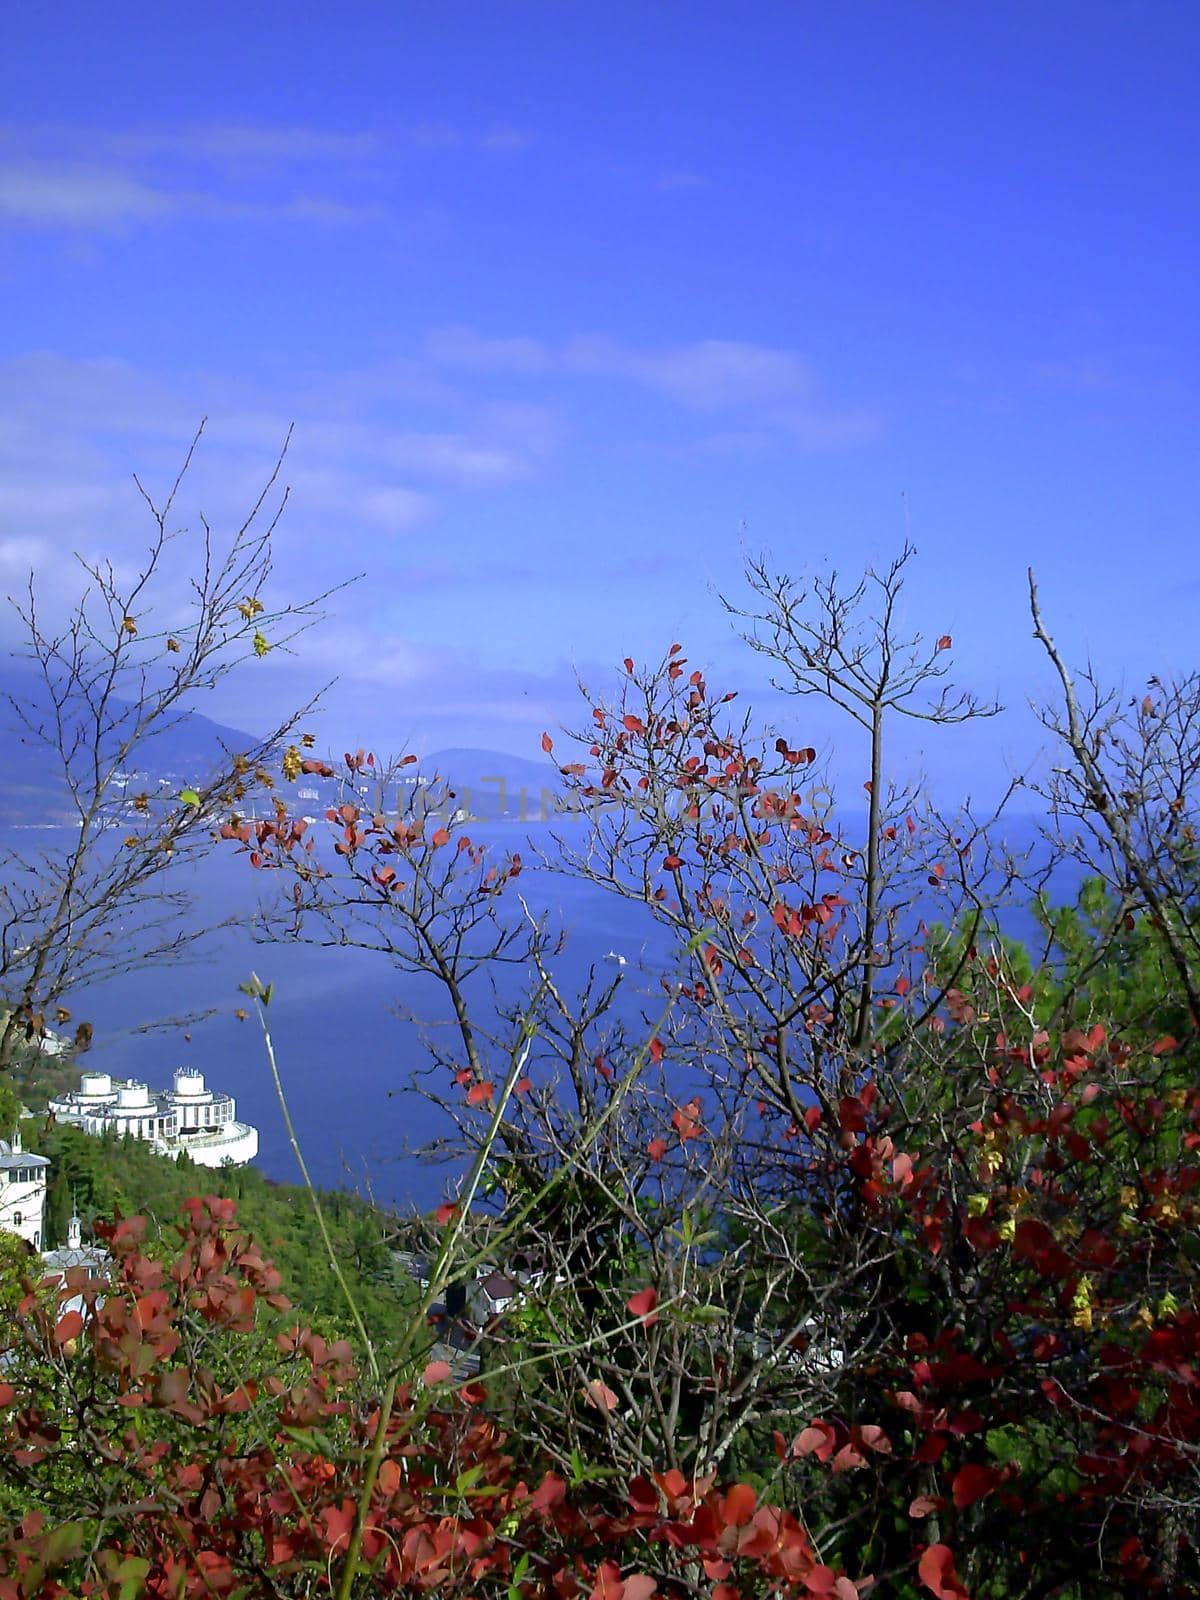 View of Yalta from the village of Livadia in the Crimea